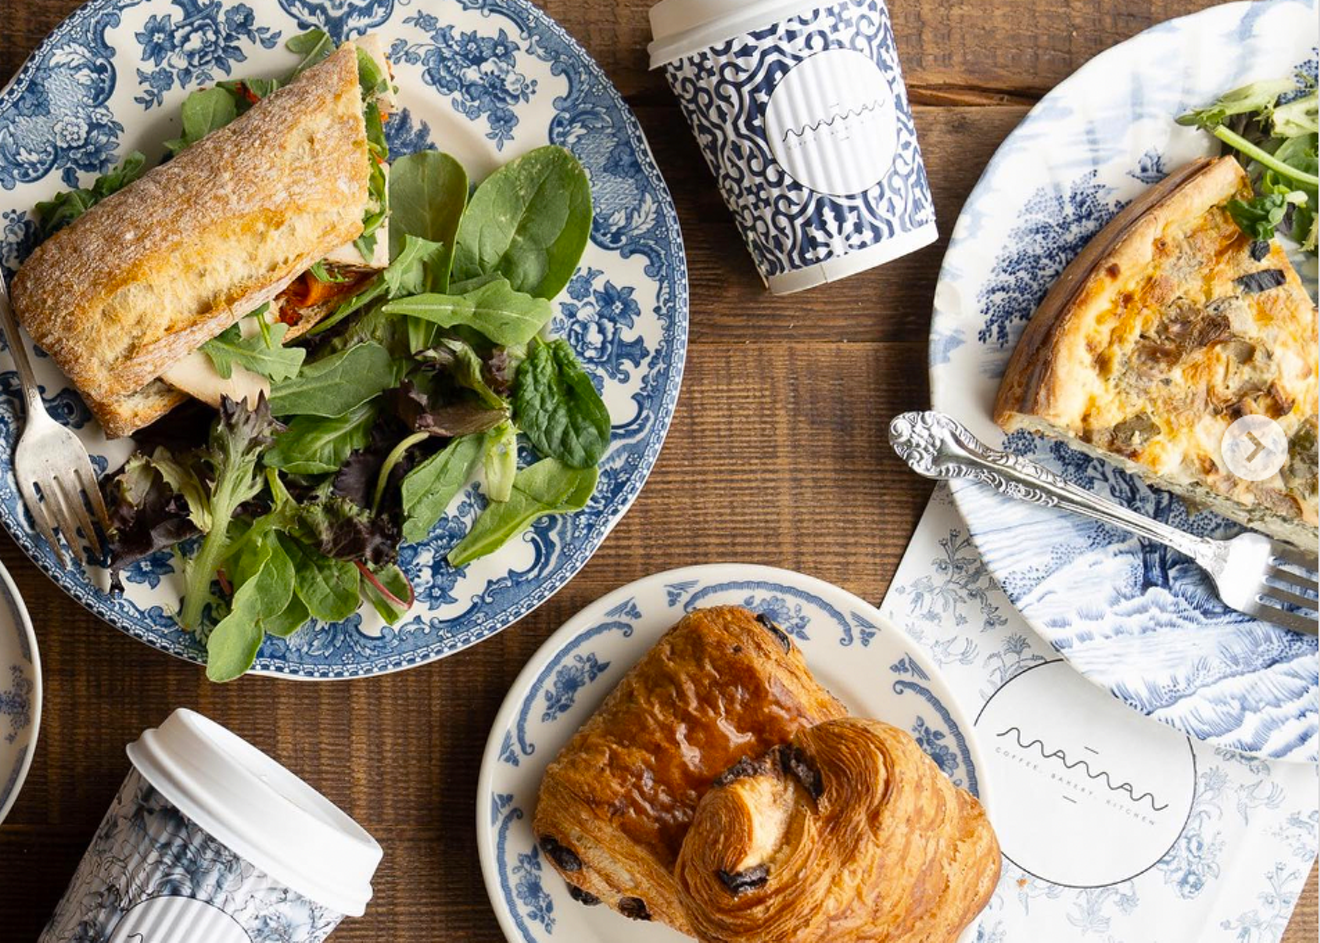 Rustic decor, greenery, and delicious quiches fill Maman, the new Wynwood bakery and café.